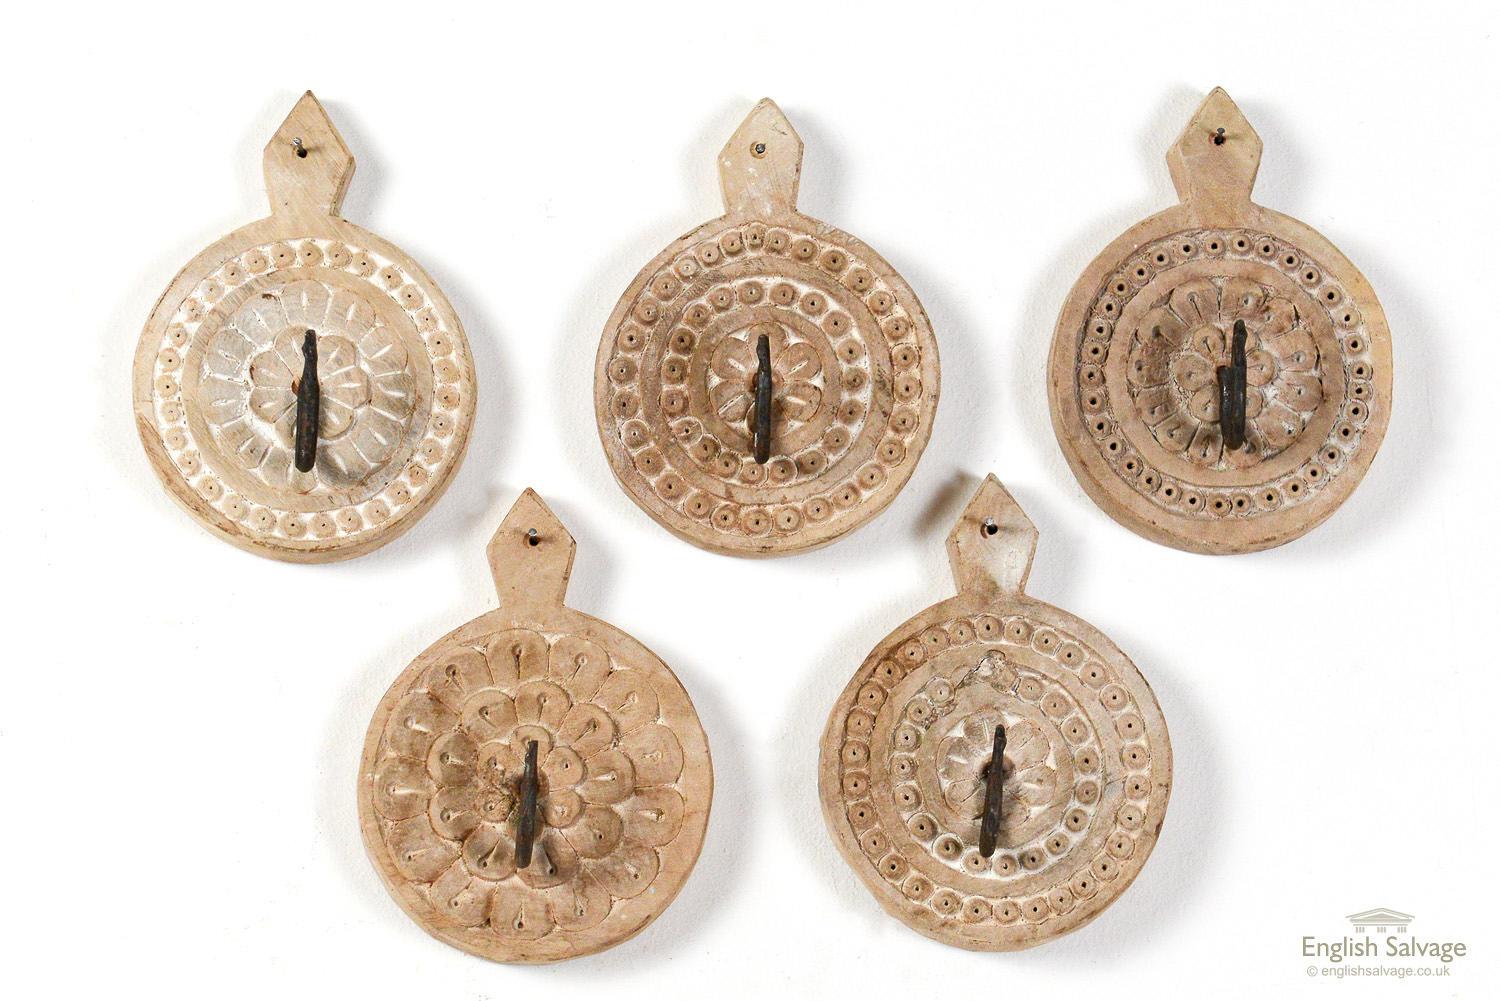 Reclaimed single wall hooks with charming hand carved circular wooden wall fixings. Approximate size of each stated below (depth doesn't include the hook). Six are carved from a dark colored wood, the others are made from a lighter wood, as shown in